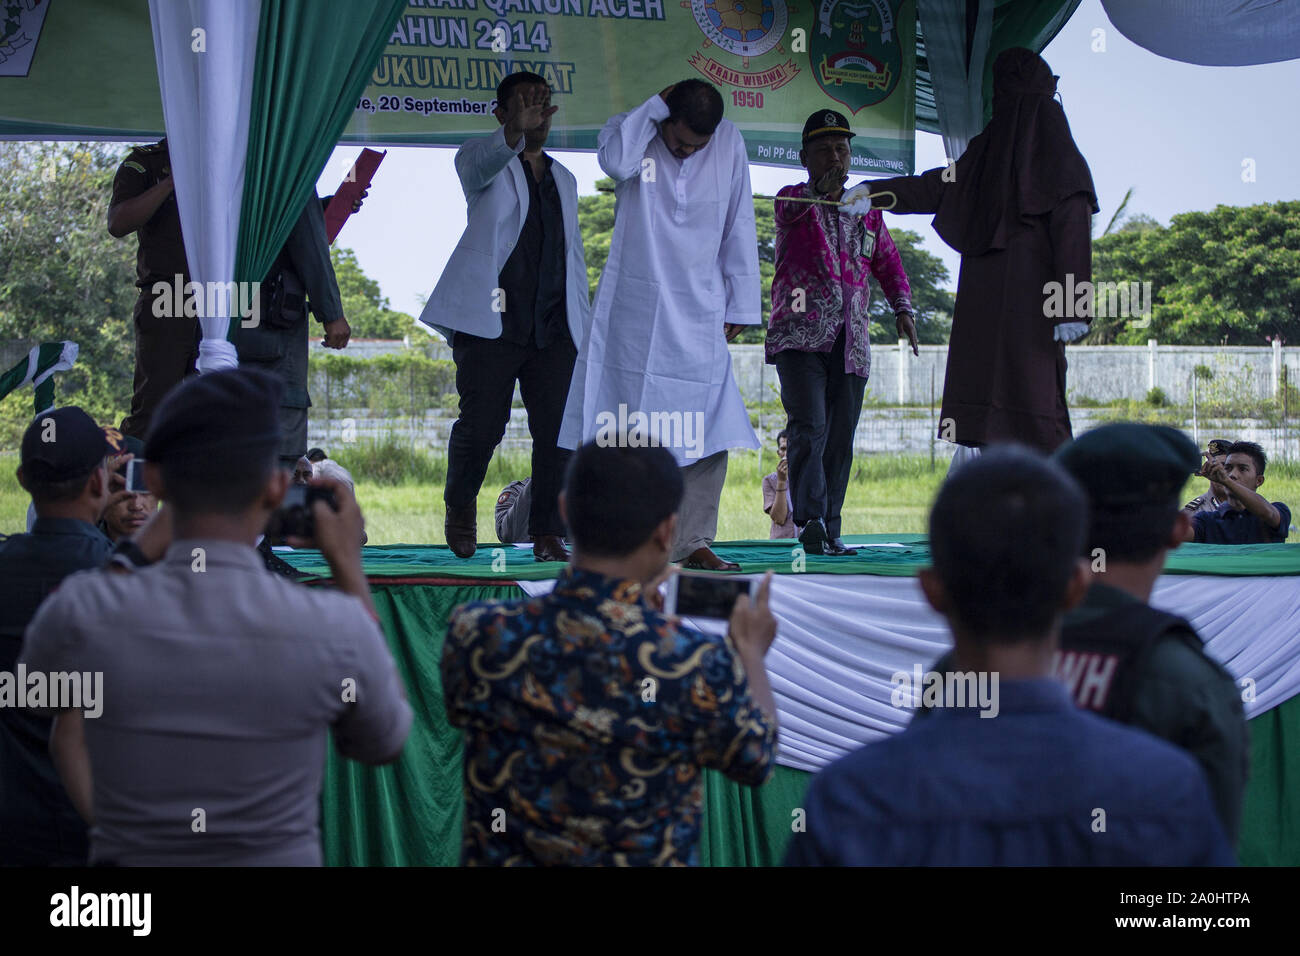 Lhokseumawe, Aceh, Indonesia. 20th Sep, 2019. Officials who witnessed stop the caning sentence carried out by Sharia officials because the neck of the man who was caught having an affair with someone else's wife grimaced suffered pain during a caning sentence at a stadium in Lhokseumawe, Aceh. The couple who were caught having an affair were whipped 9 times each for violating Islamic Sharia law in Aceh which is the most conservative province of Islamic law in Indonesia. Credit: Zikri Maulana/ZUMA Wire/Alamy Live News Stock Photo